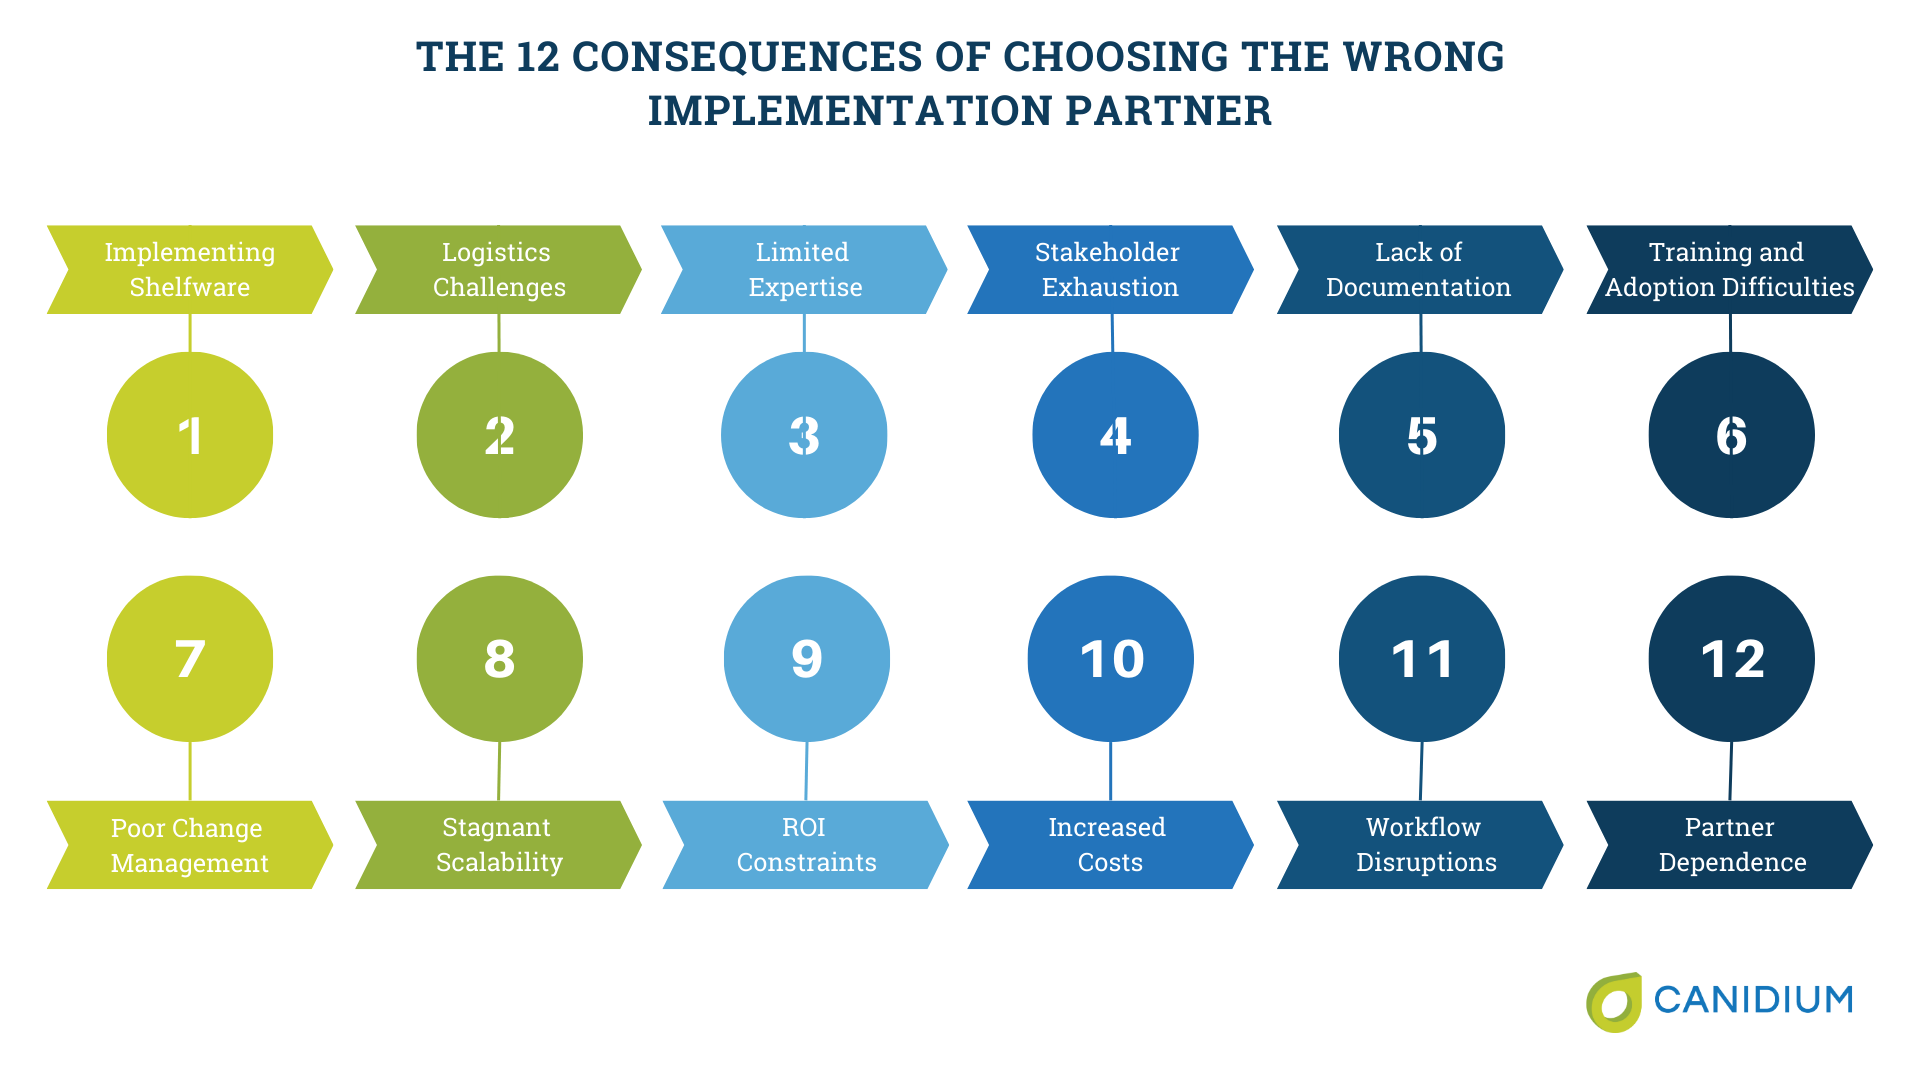 The 12 Consequences of choosing the wrong implementation partner